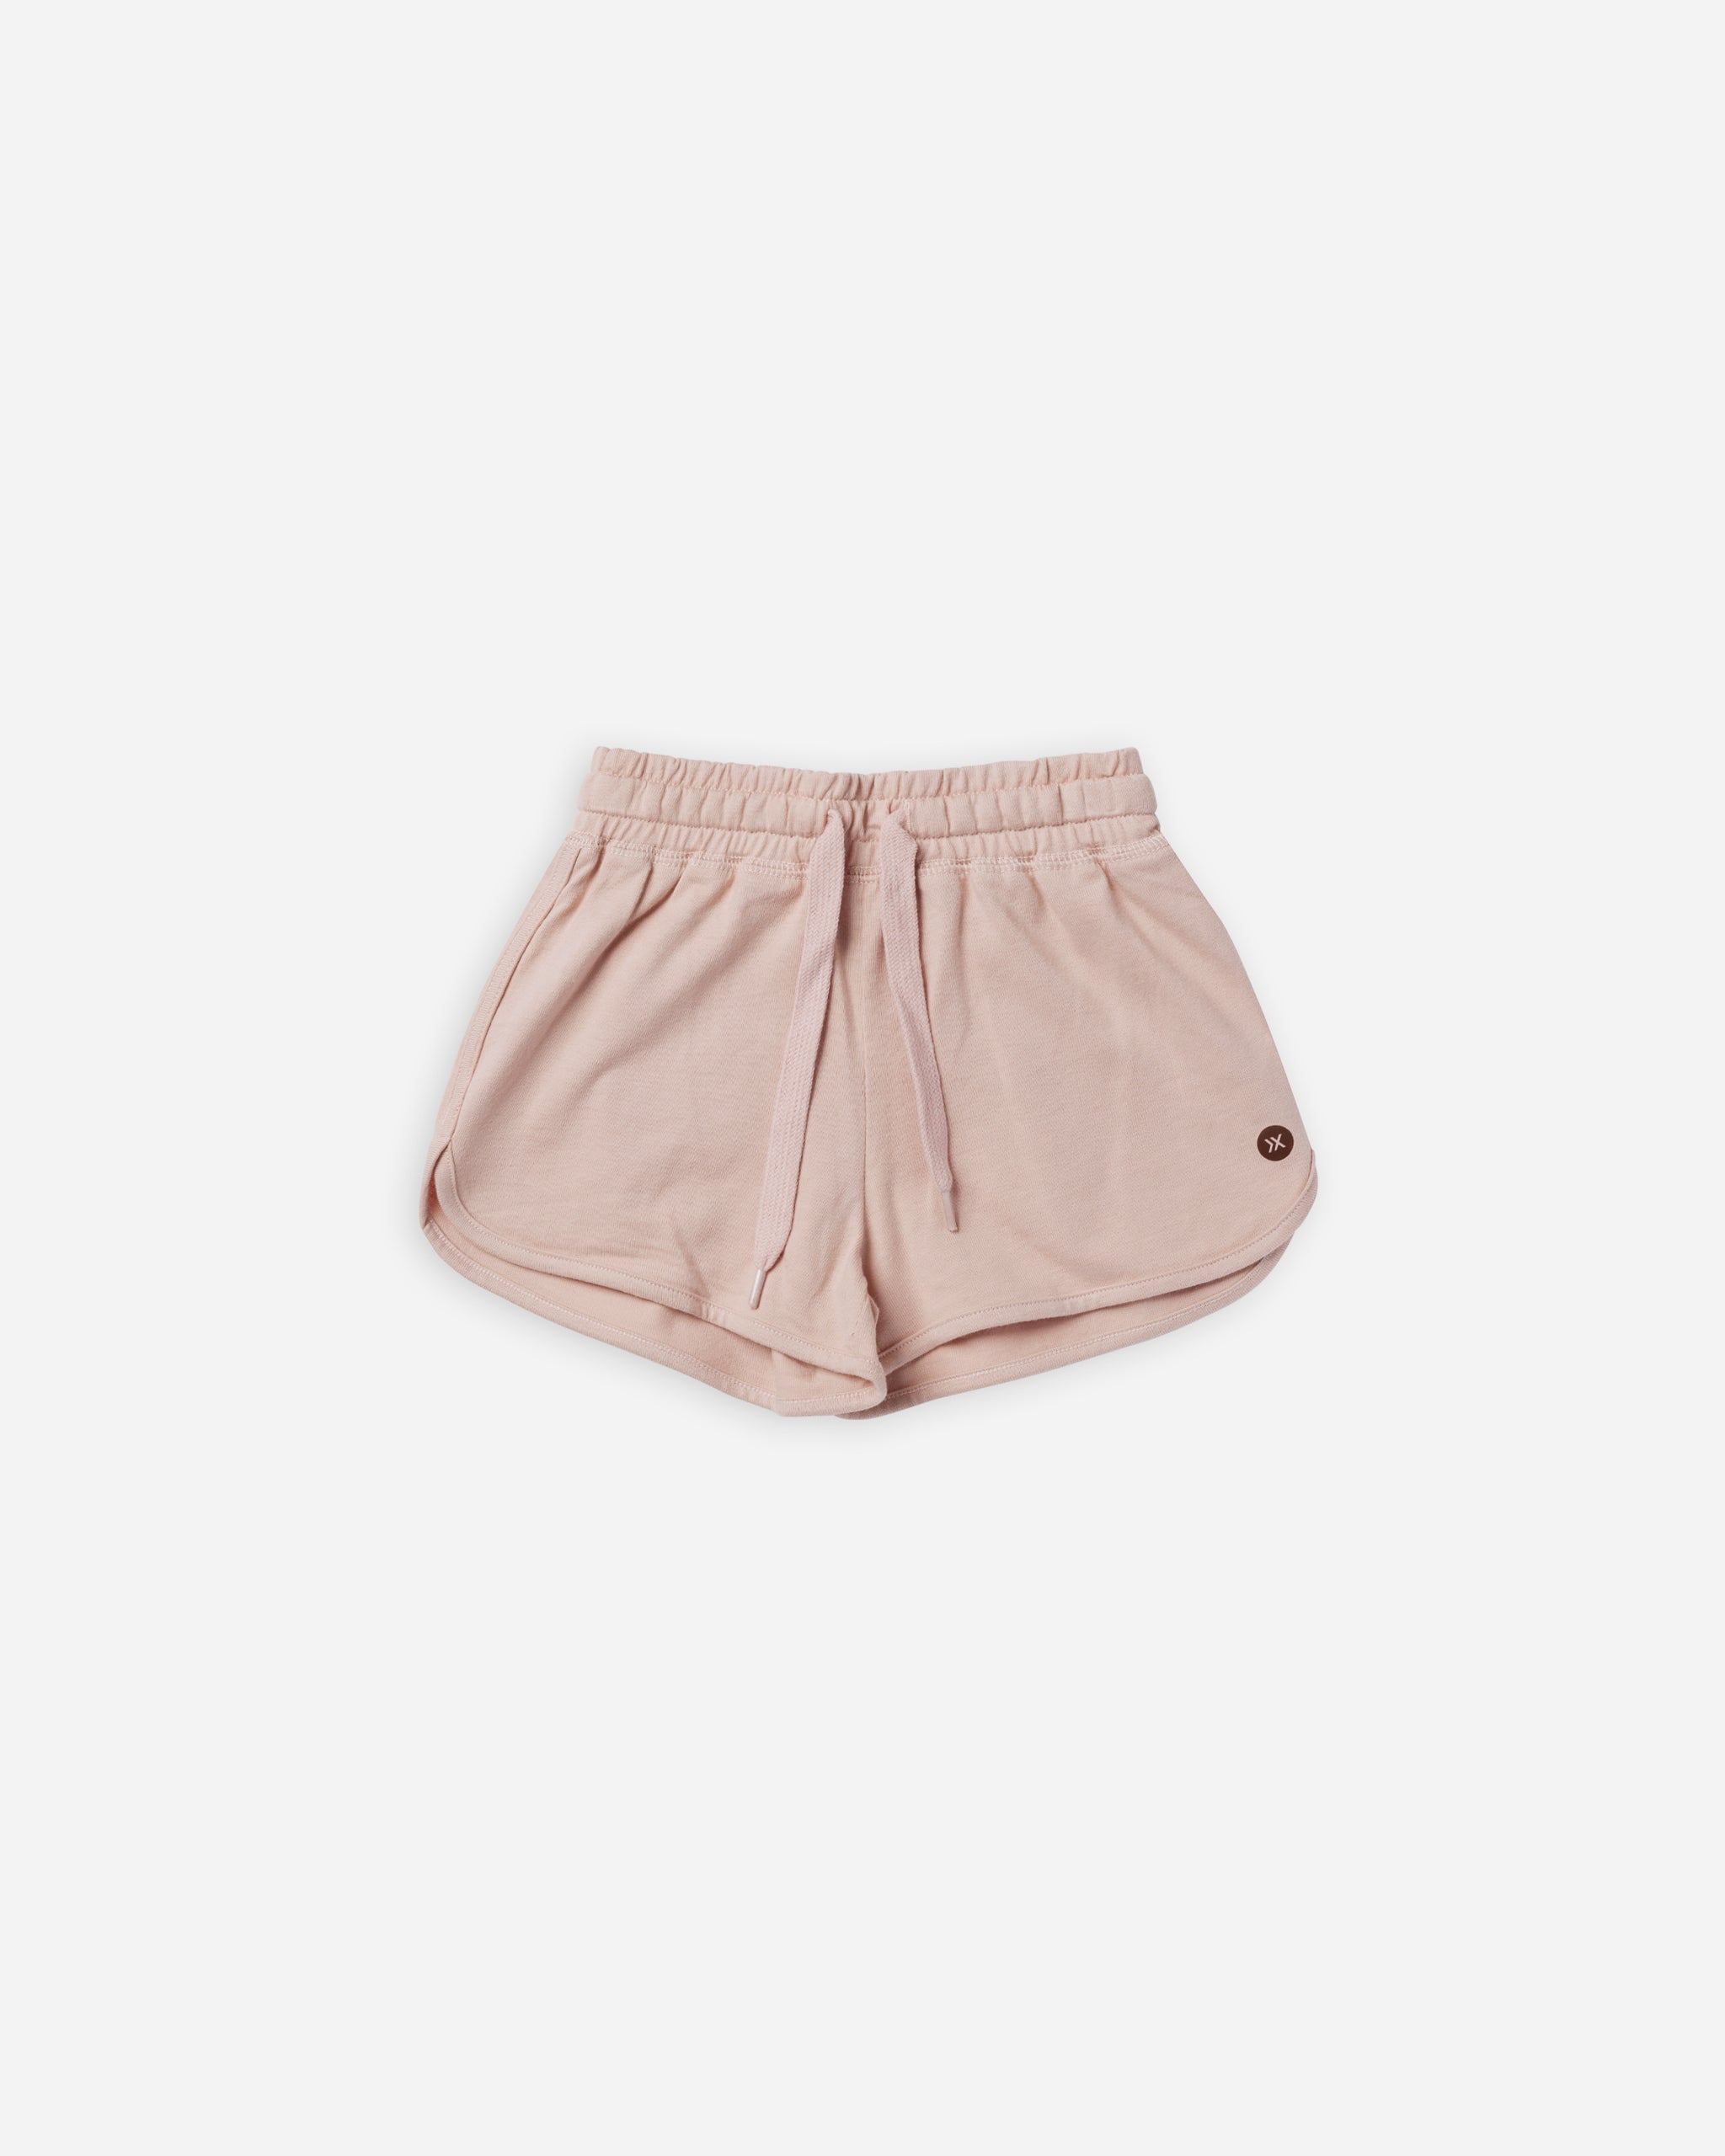 Playa Shorts | Blush - Rylee + Cru | Kids Clothes | Trendy Baby Clothes | Modern Infant Outfits |